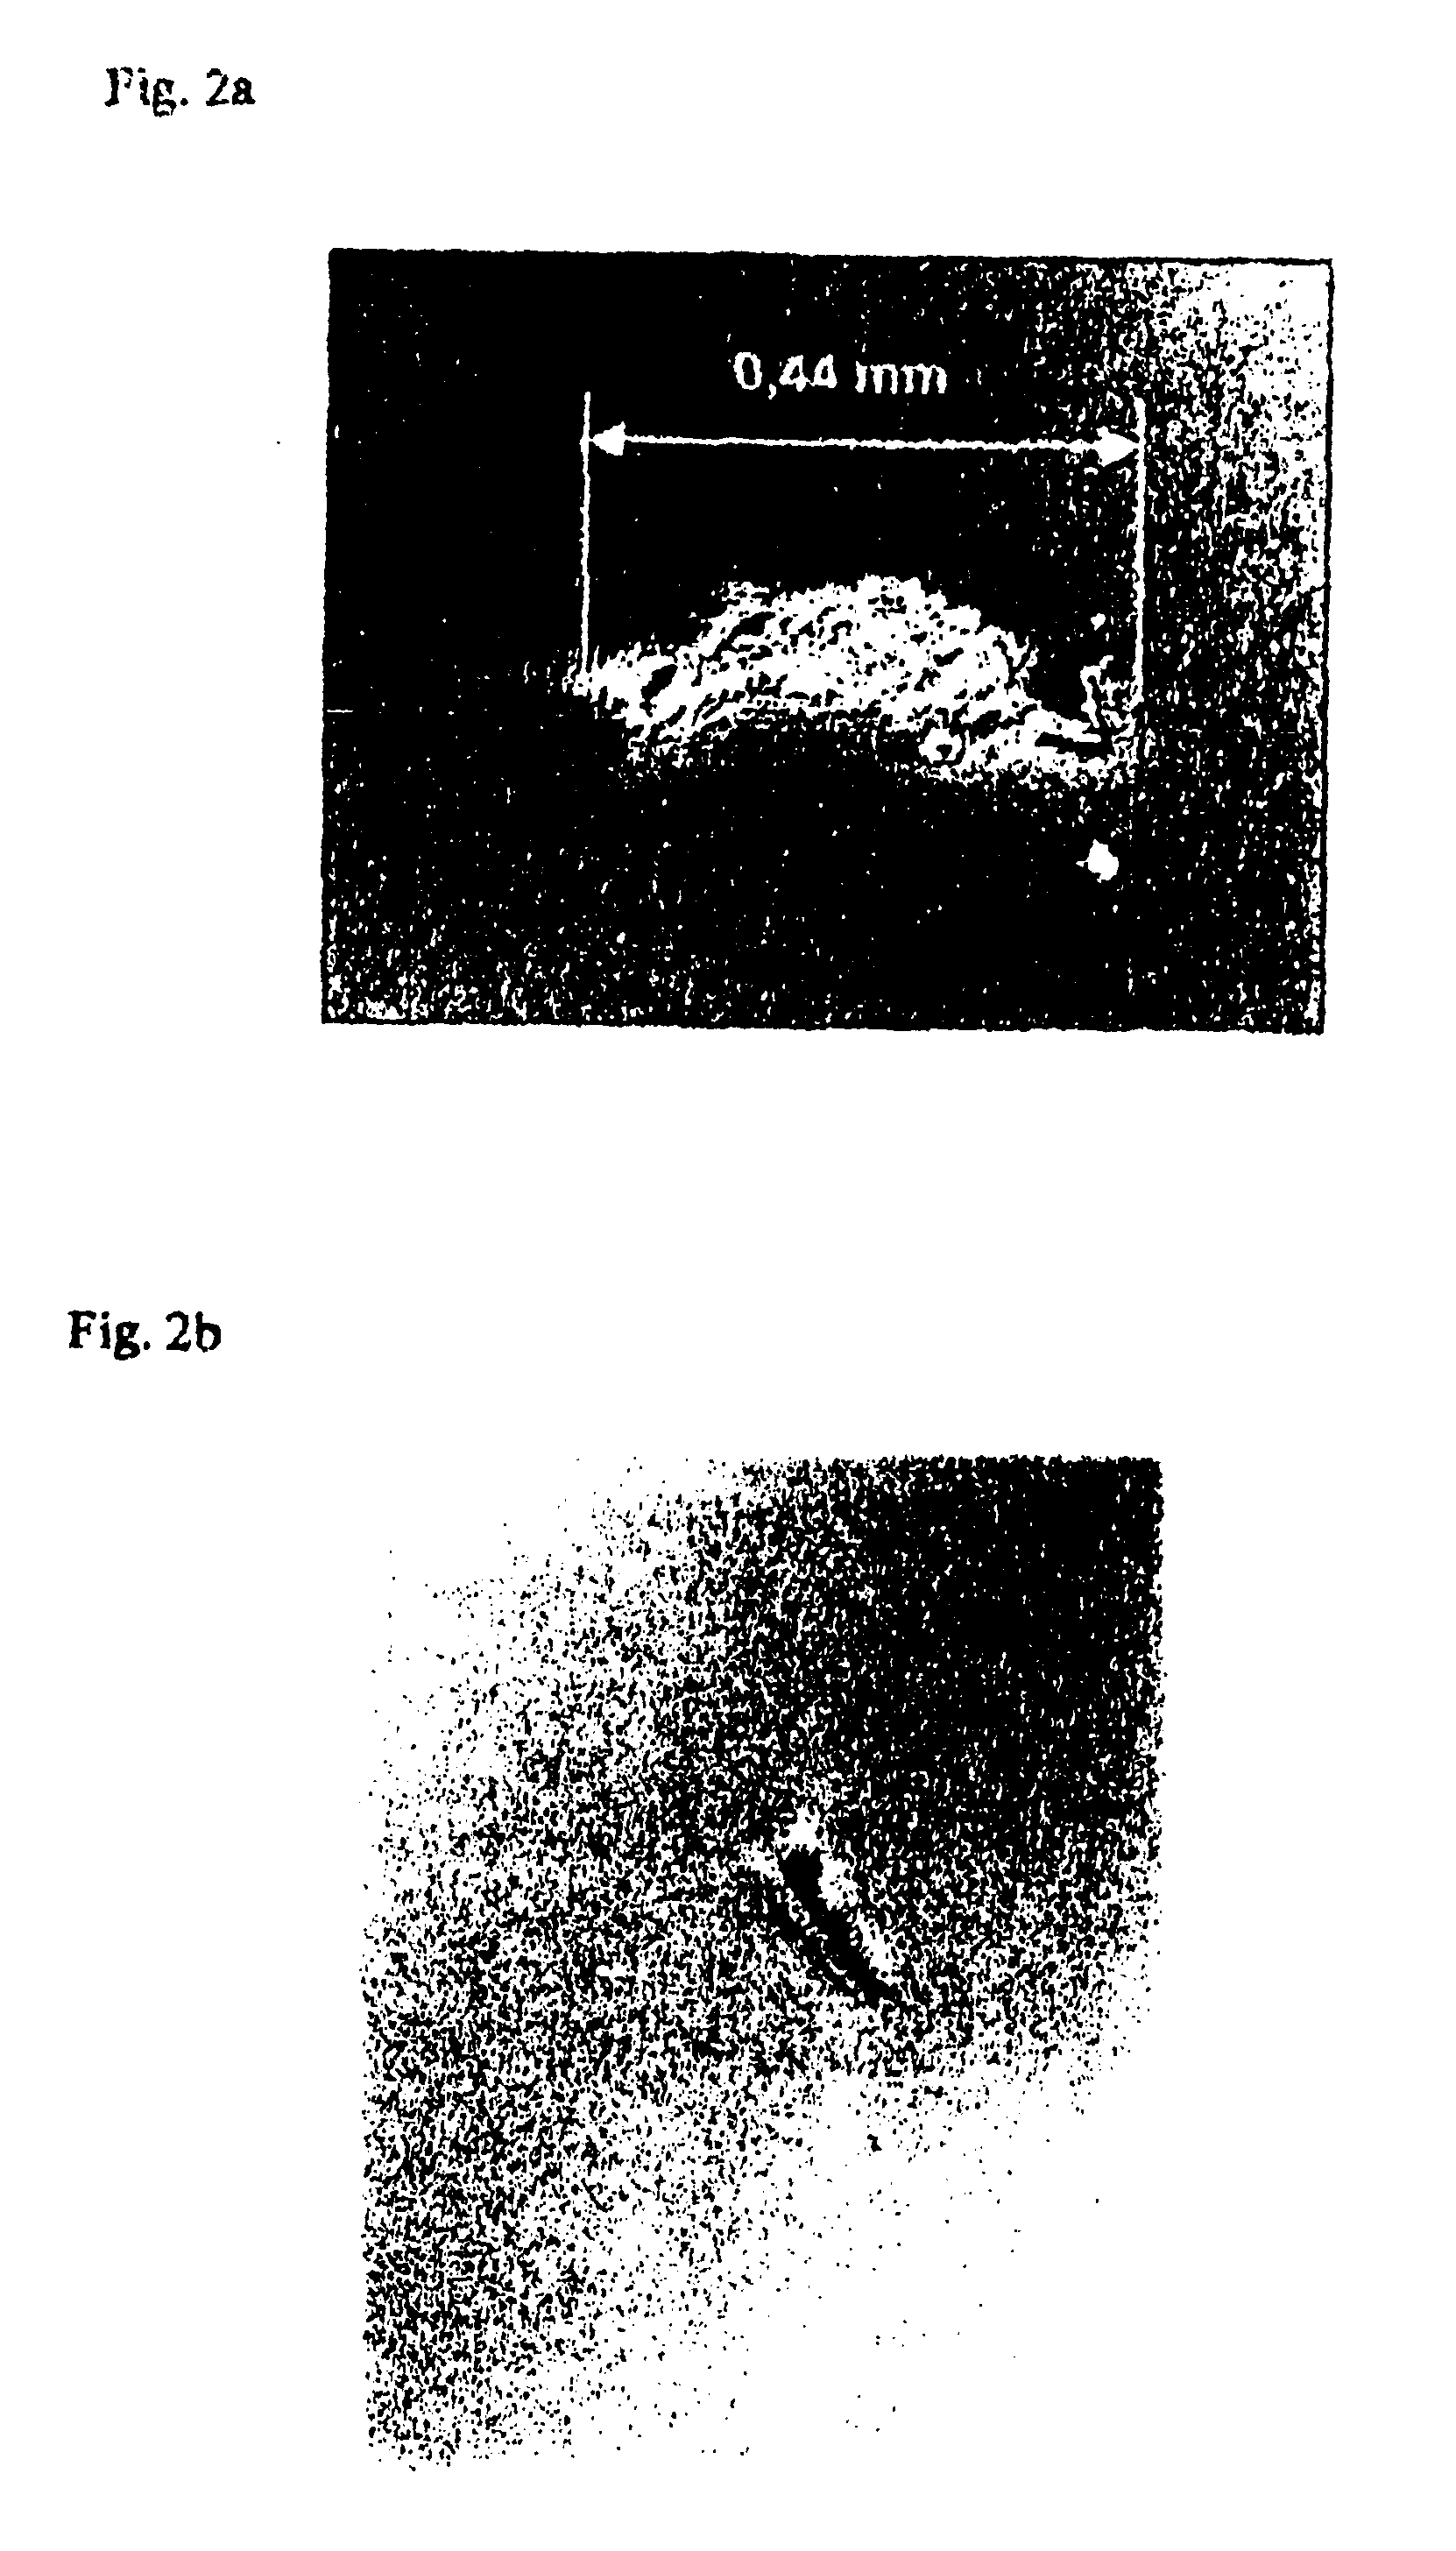 Device for thermal treatment of substrates